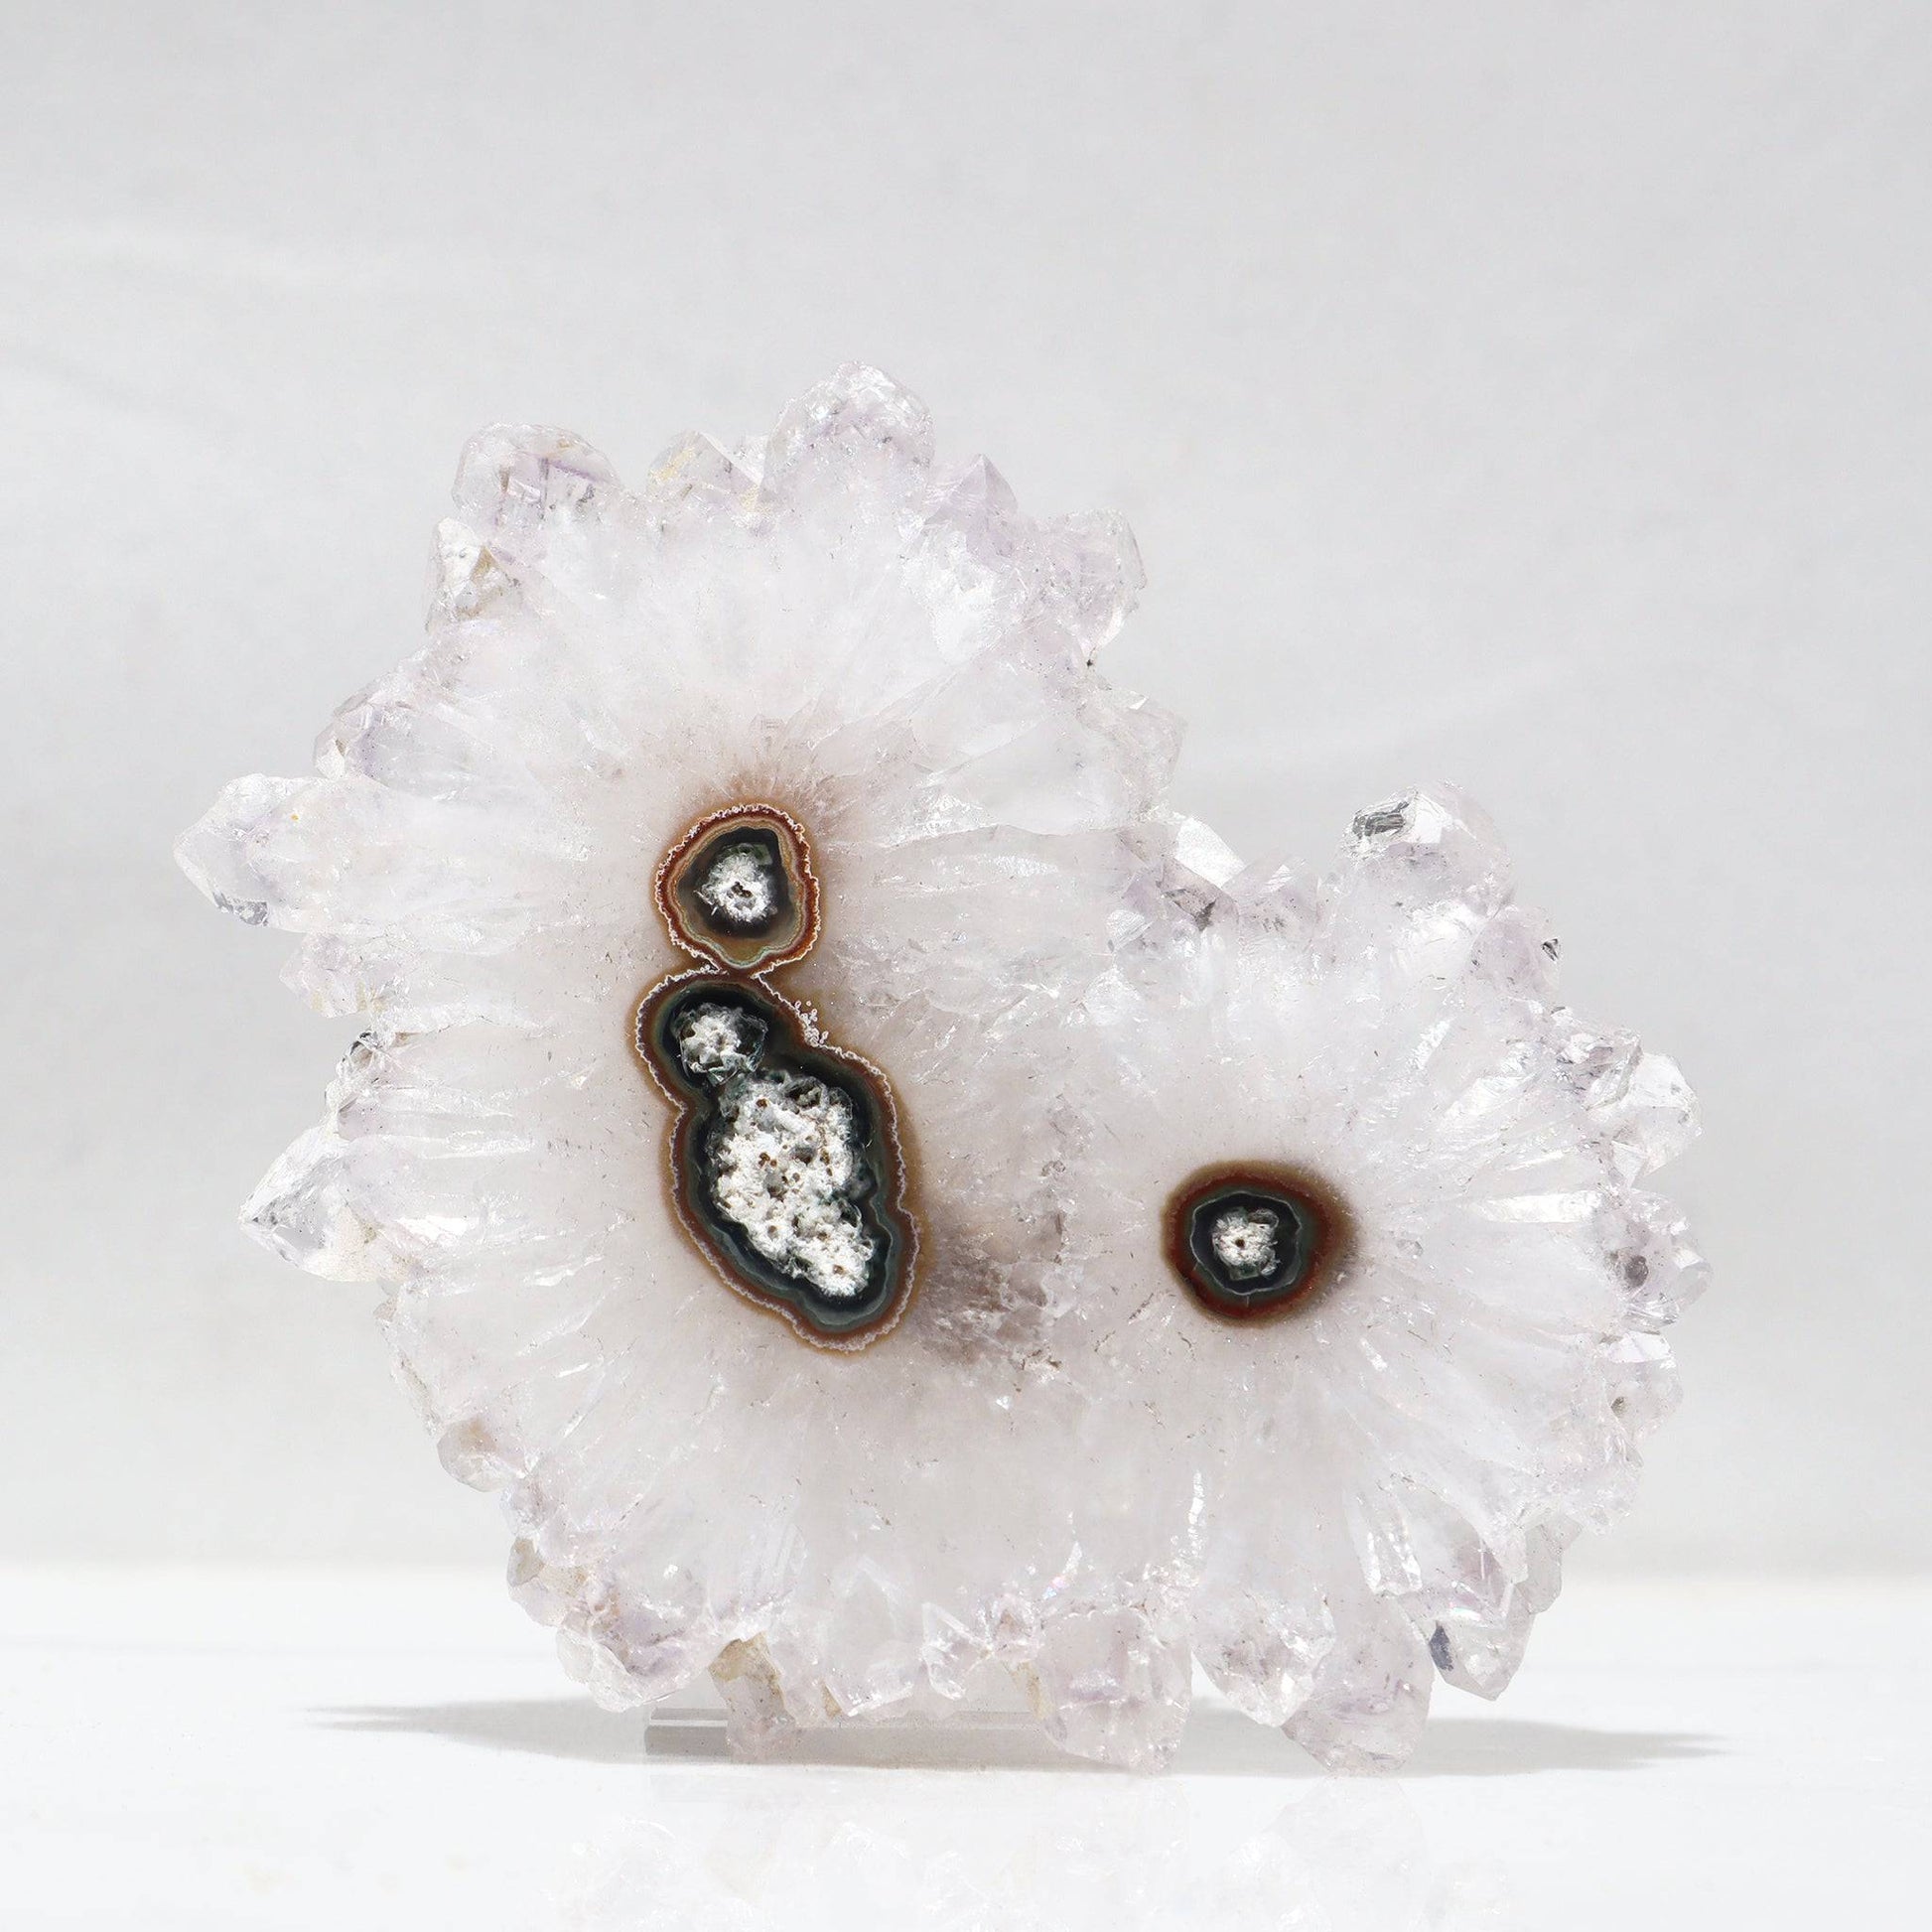 Snowy-winter inspiring, and stunning triple amethyst stalactite formation. This mineral flower piece offers multiple stalactite centers of brown and green agate as the white quartz crystals are pure see-through white.